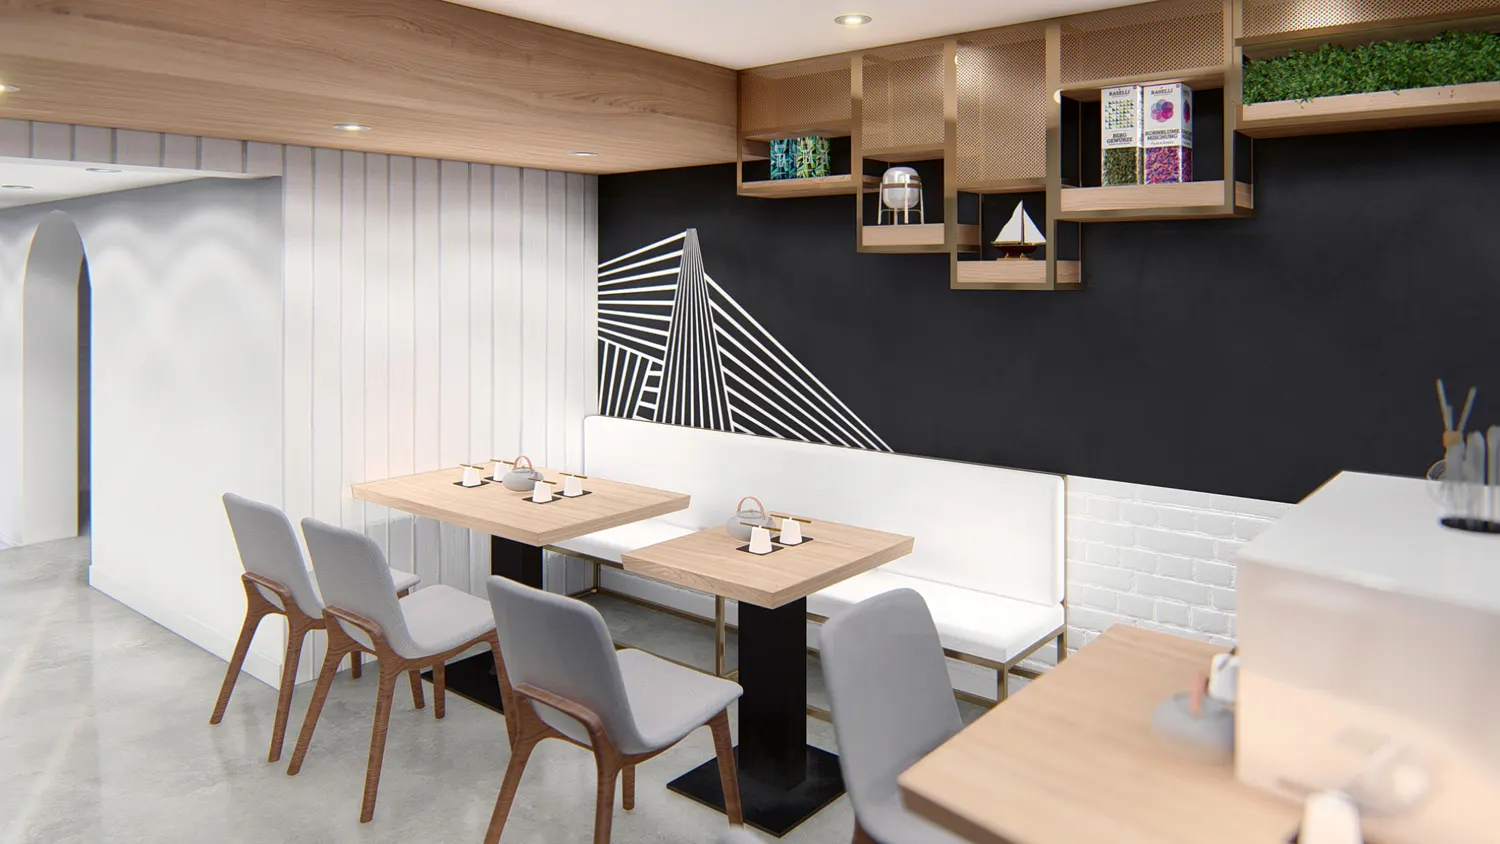 Interior design project for Awas Noodles 阿華師. Designed 3D rendering